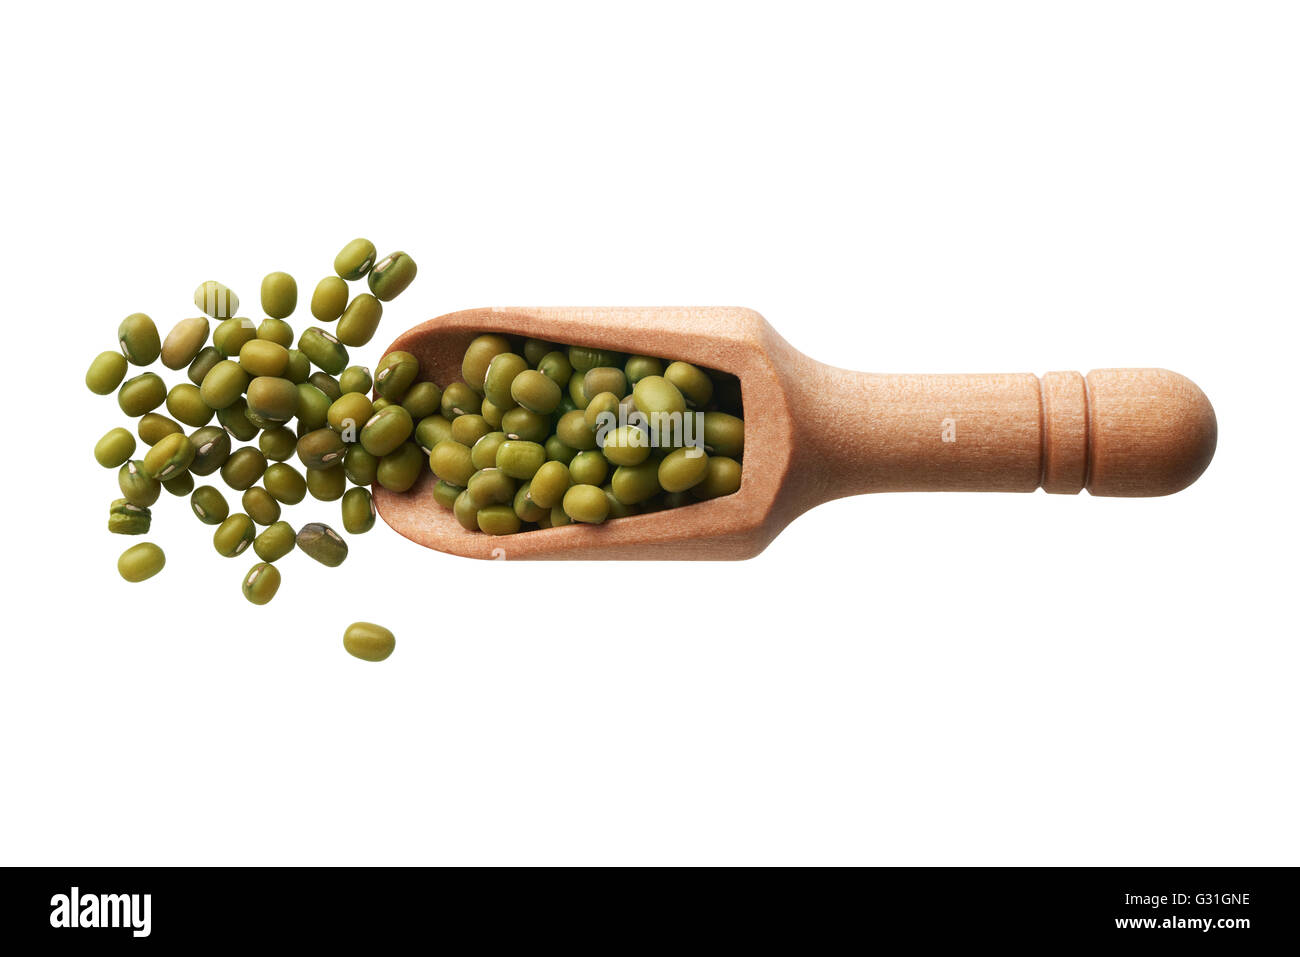 Food ingredients: heap of mung beans in a wooden scoop, on white background Stock Photo